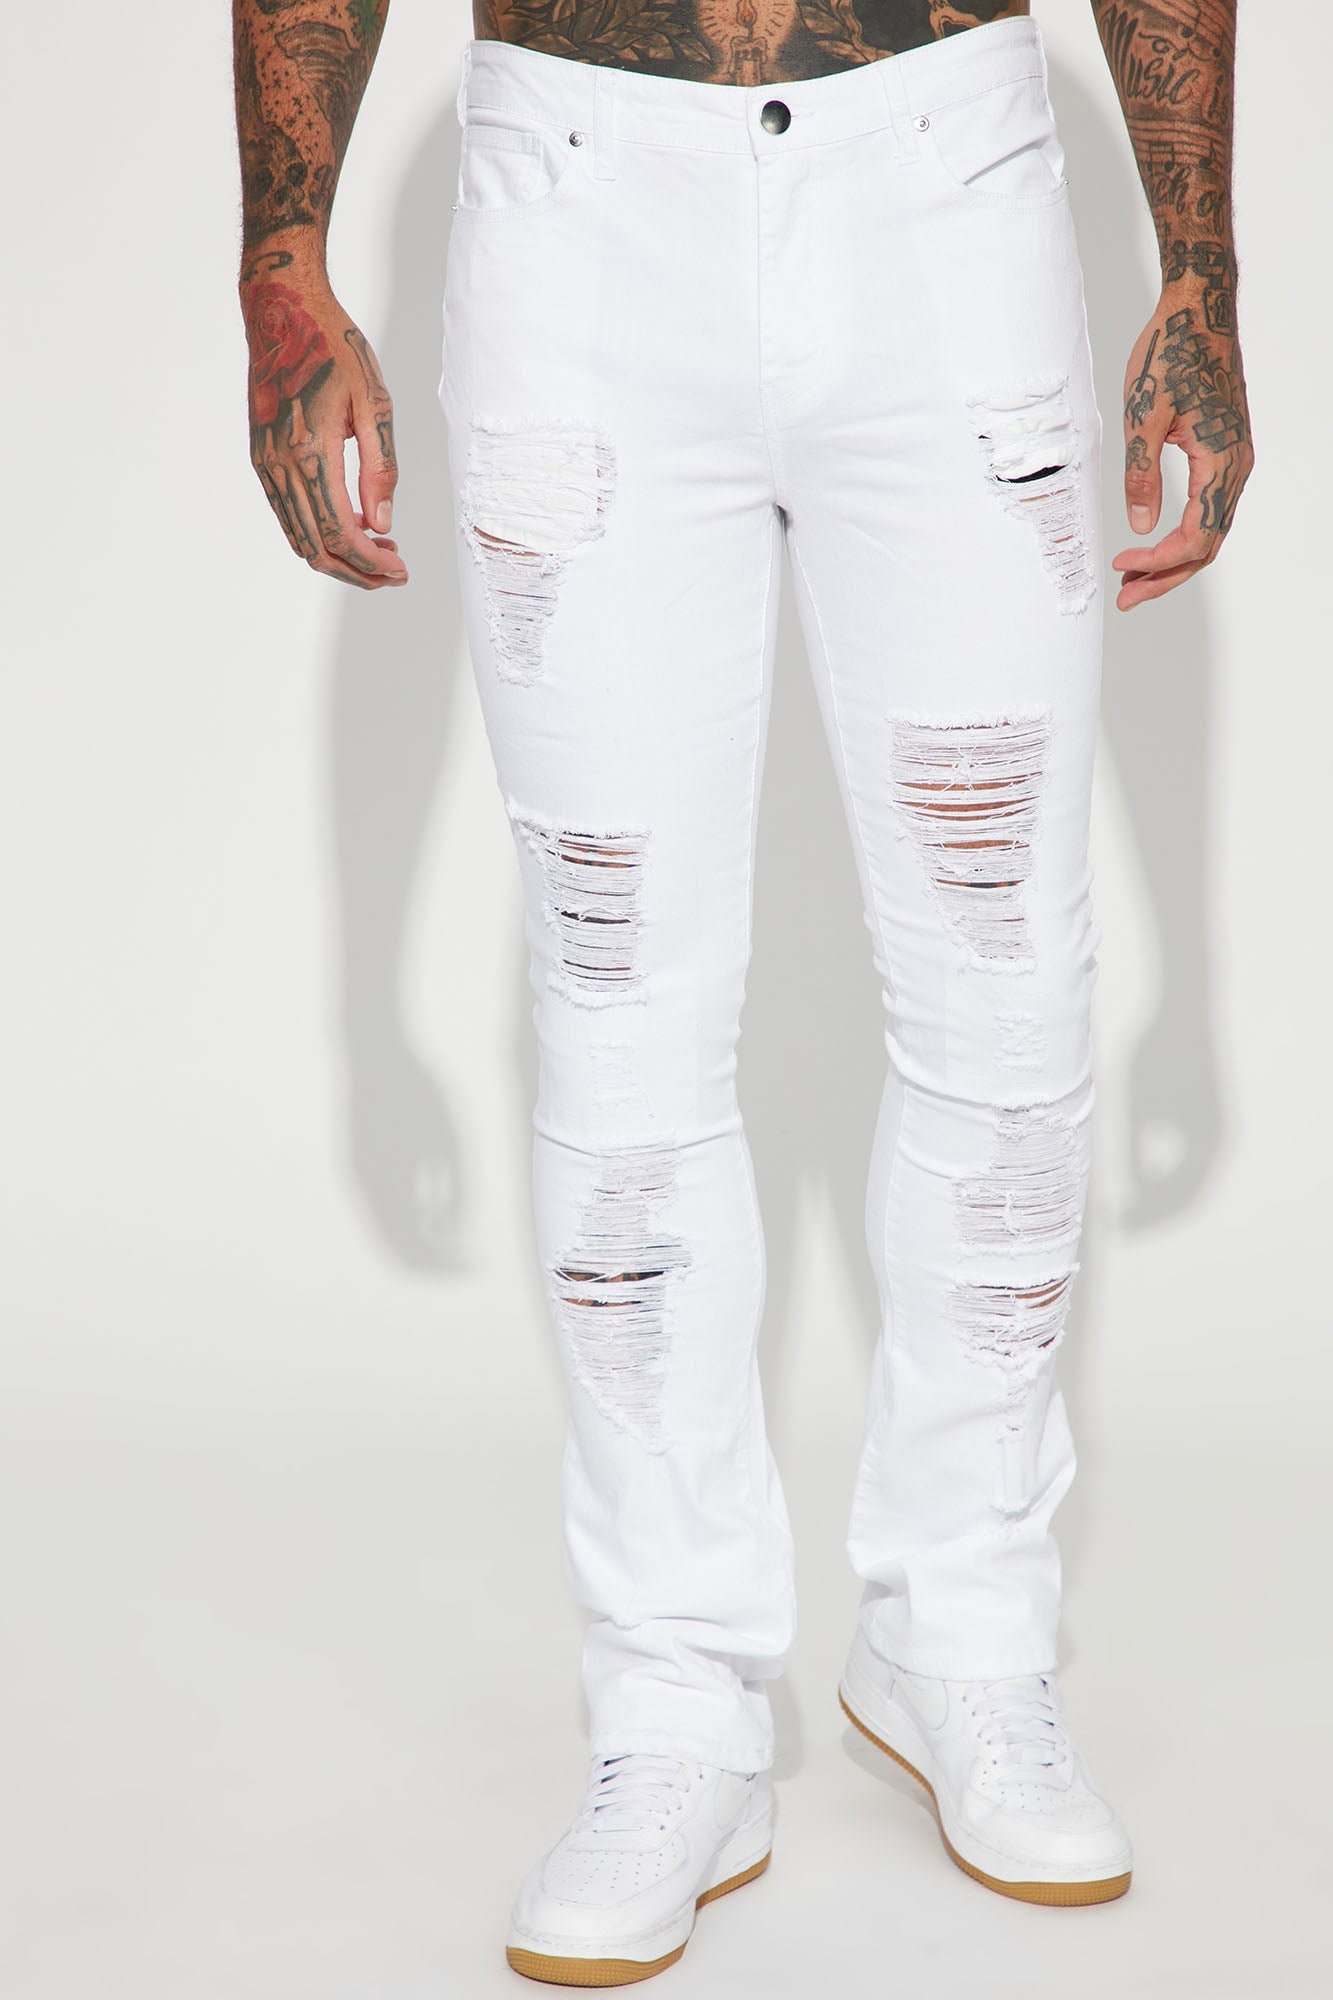 Boost Your Instagram Game with our 'For Likes' Stacked Skinny Flare Jeans in White